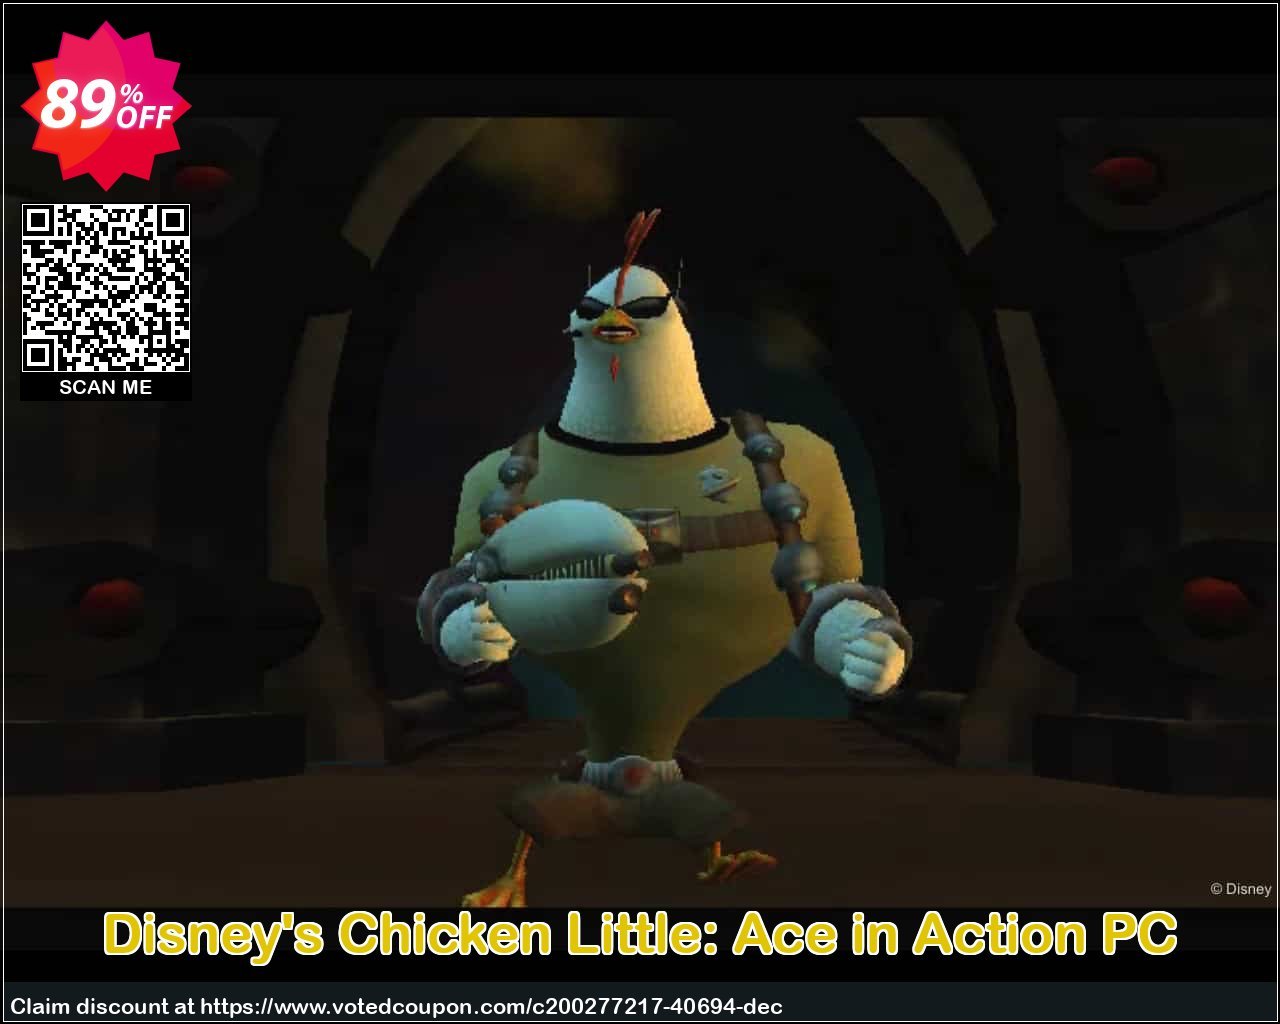 Disney's Chicken Little: Ace in Action PC Coupon Code May 2024, 89% OFF - VotedCoupon